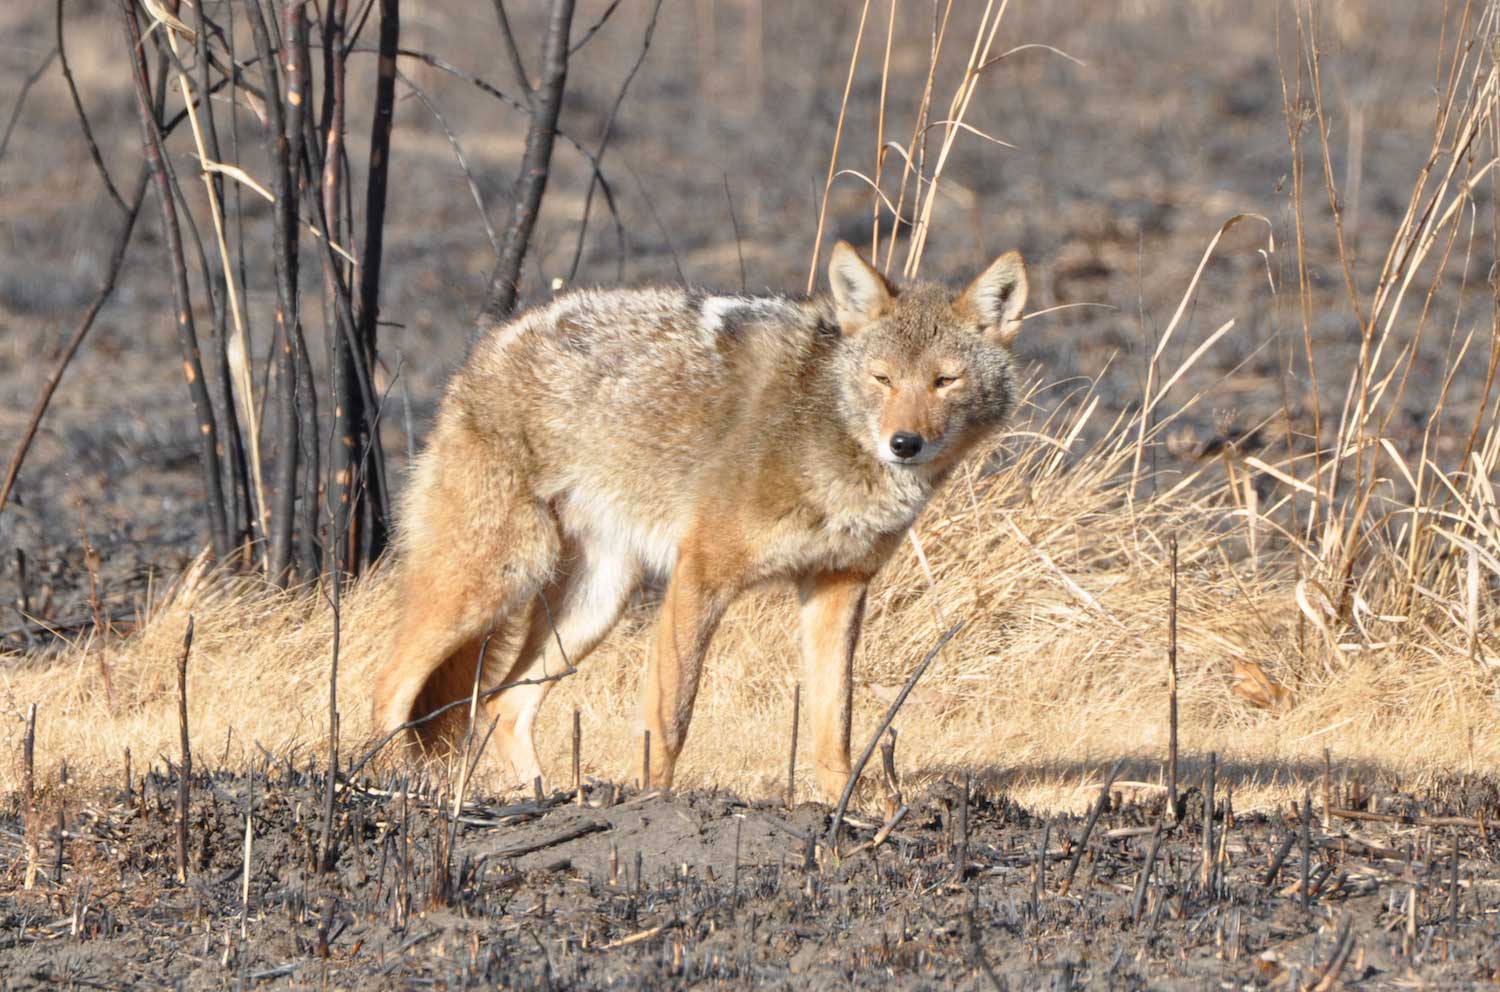 A coyote on the prairie after a prescribed burn